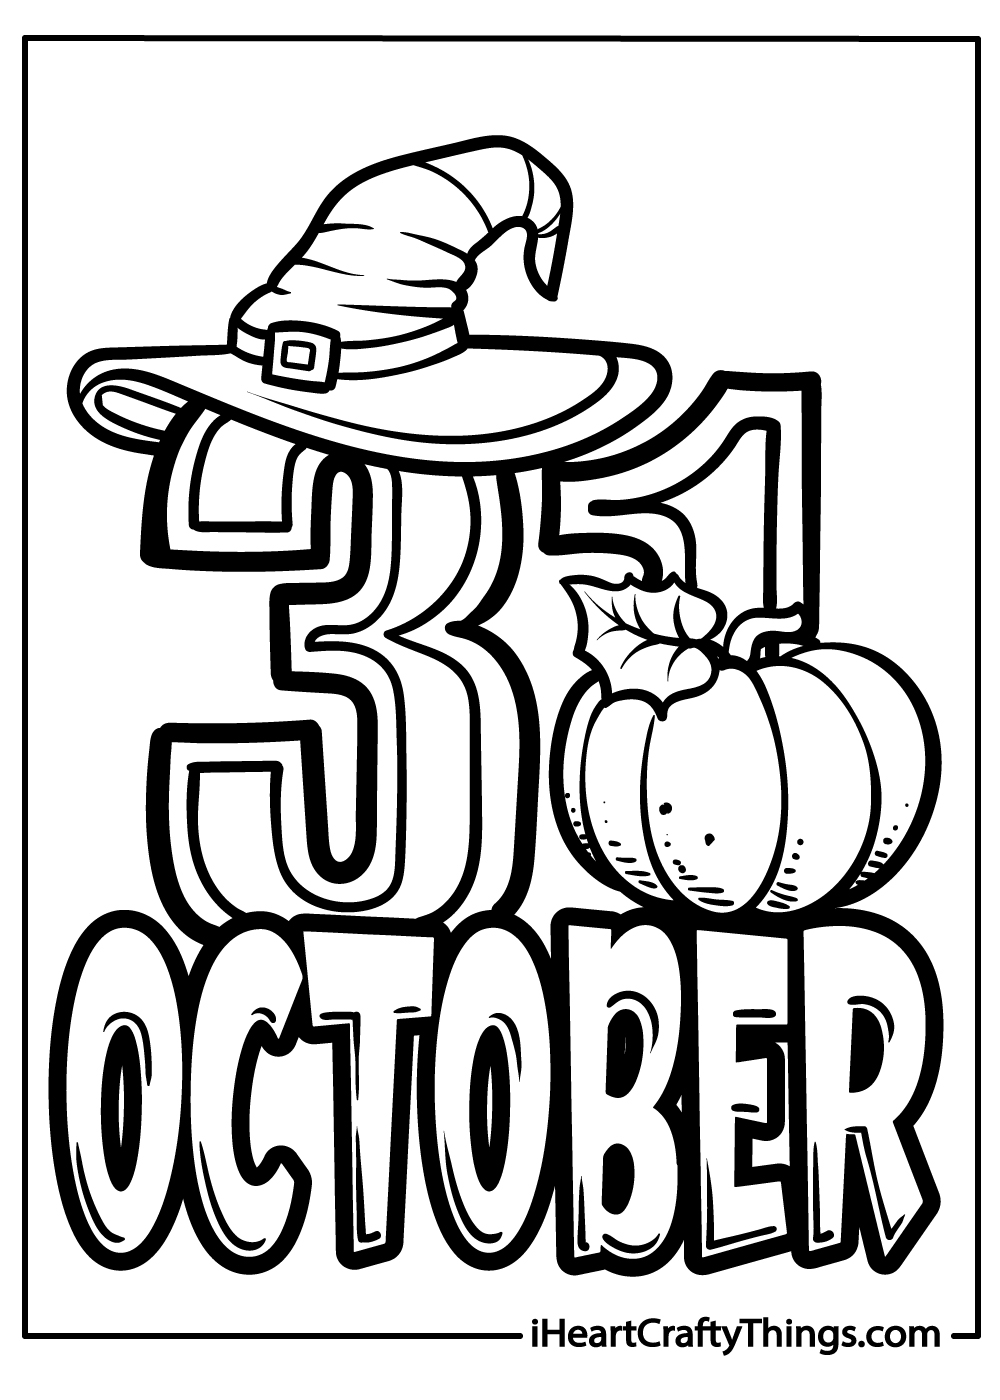 31 October coloring pages